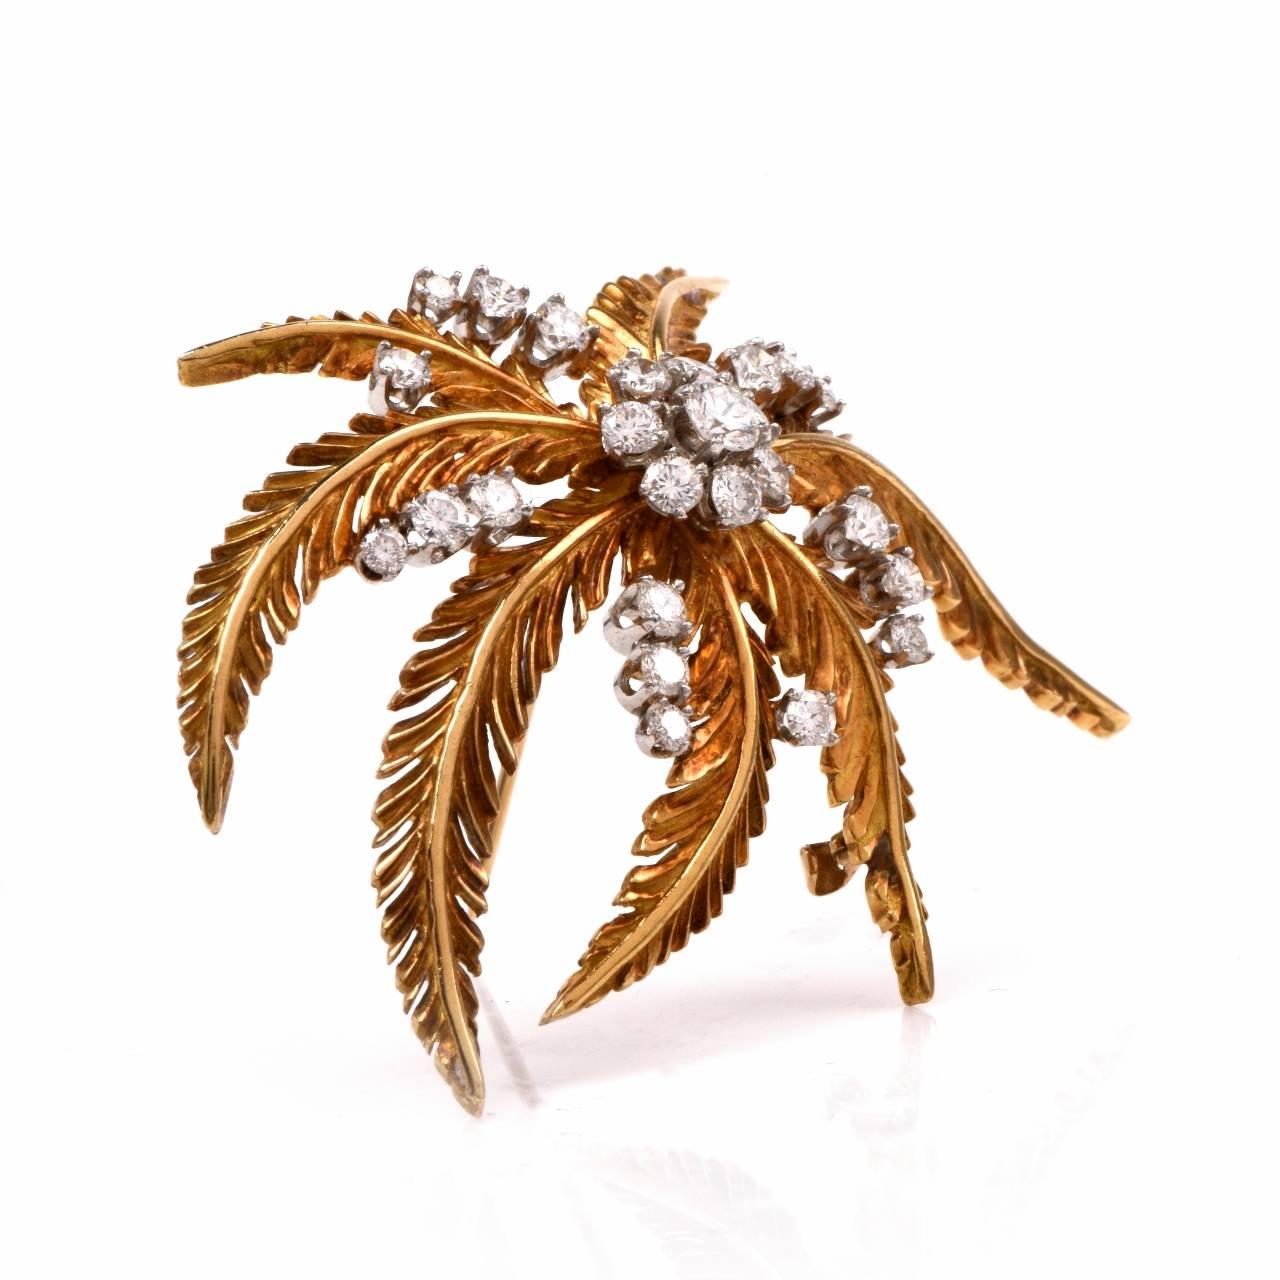 This Charming vintage pin, palm tree inspired pin is handcrafted in solid 18K yellow gold, weighing approx: 17.5 grams and measuring approx: 56mm wide. This pin exposes a lovely palm tree detailed design with a flower accenting the center. The